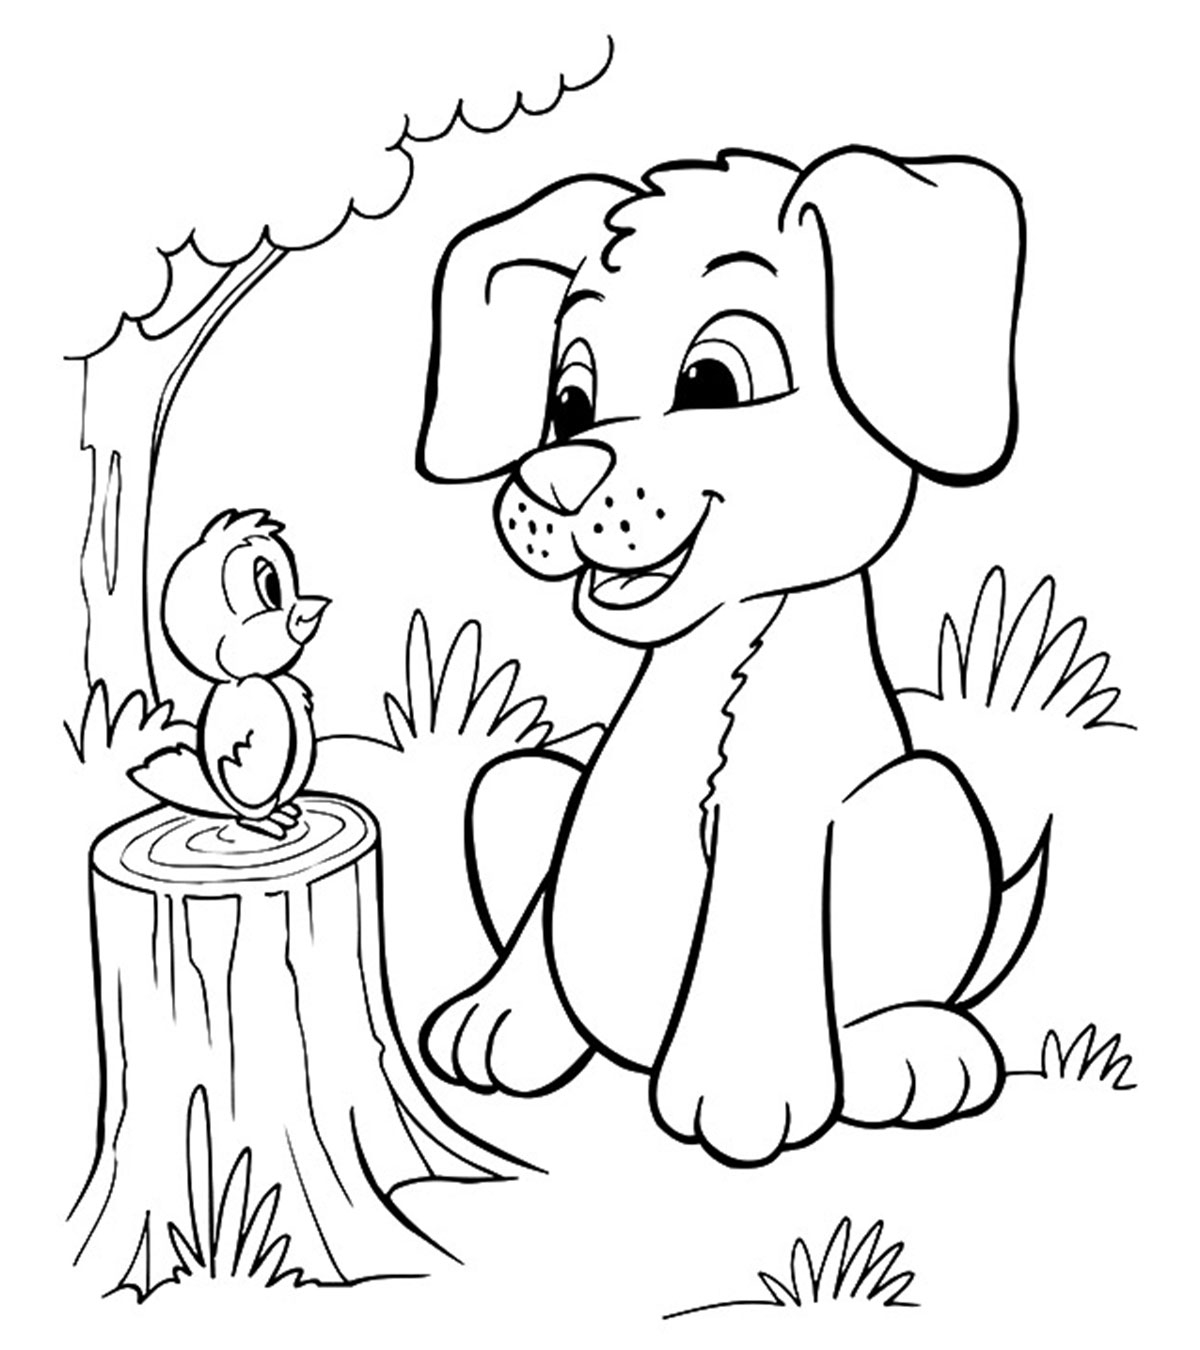 Little Puppy Coloring Pages Top 30 Free Printable Puppy Coloring Pages Online